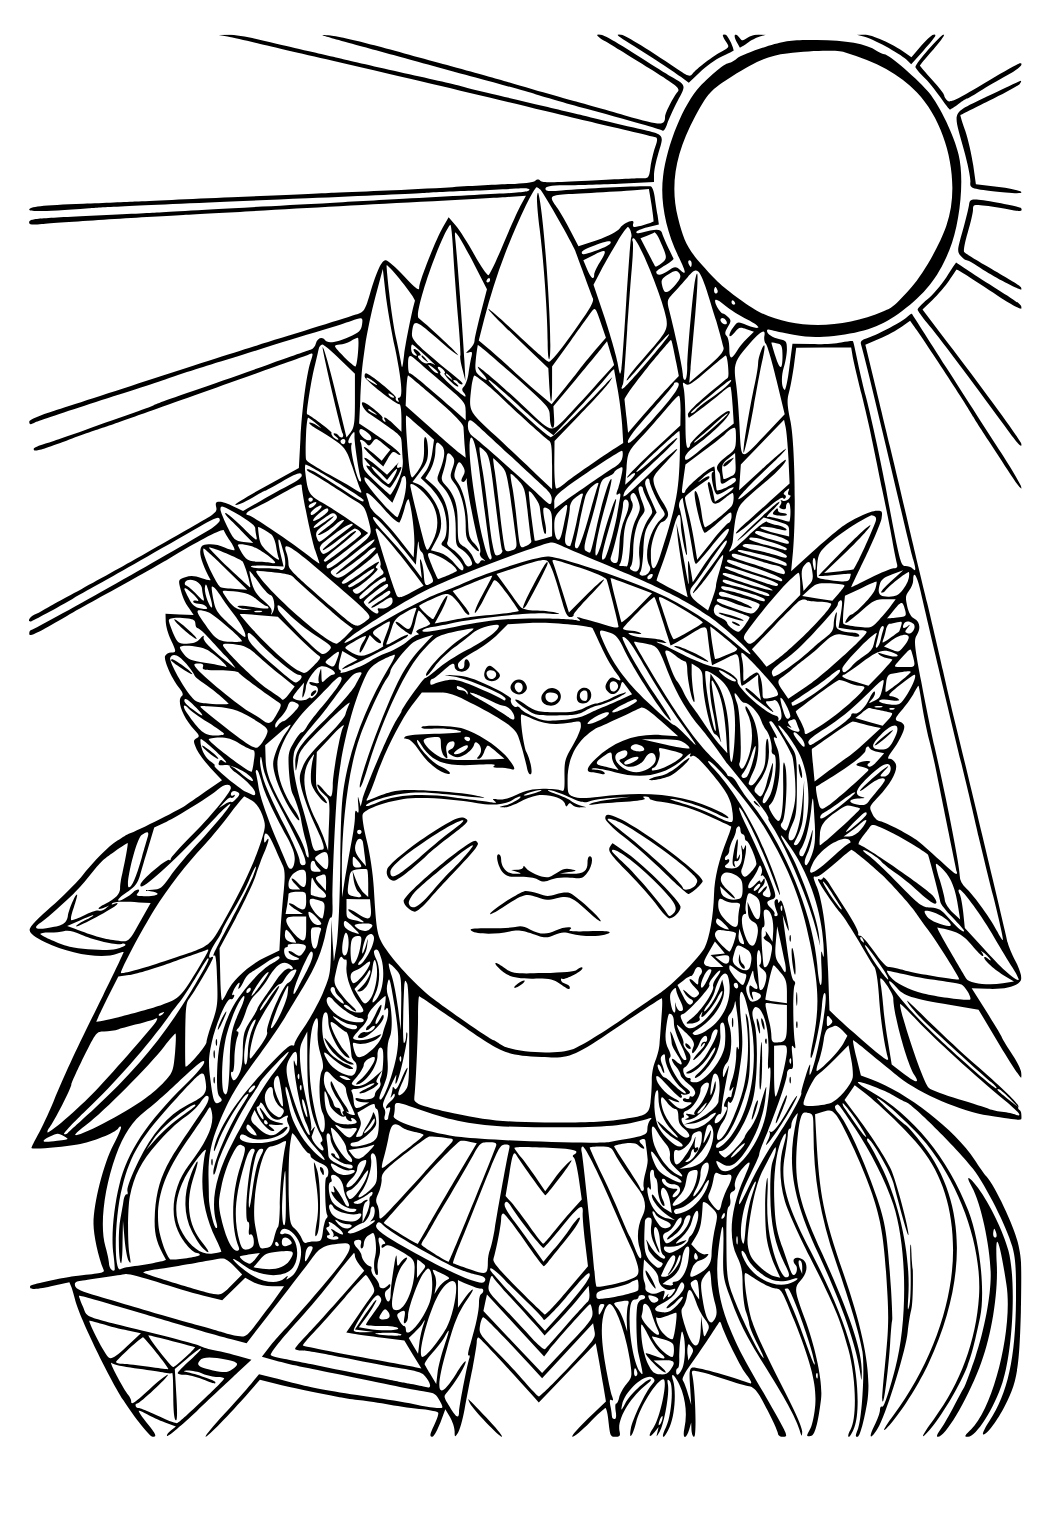 Free printable native american sun coloring page for adults and kids